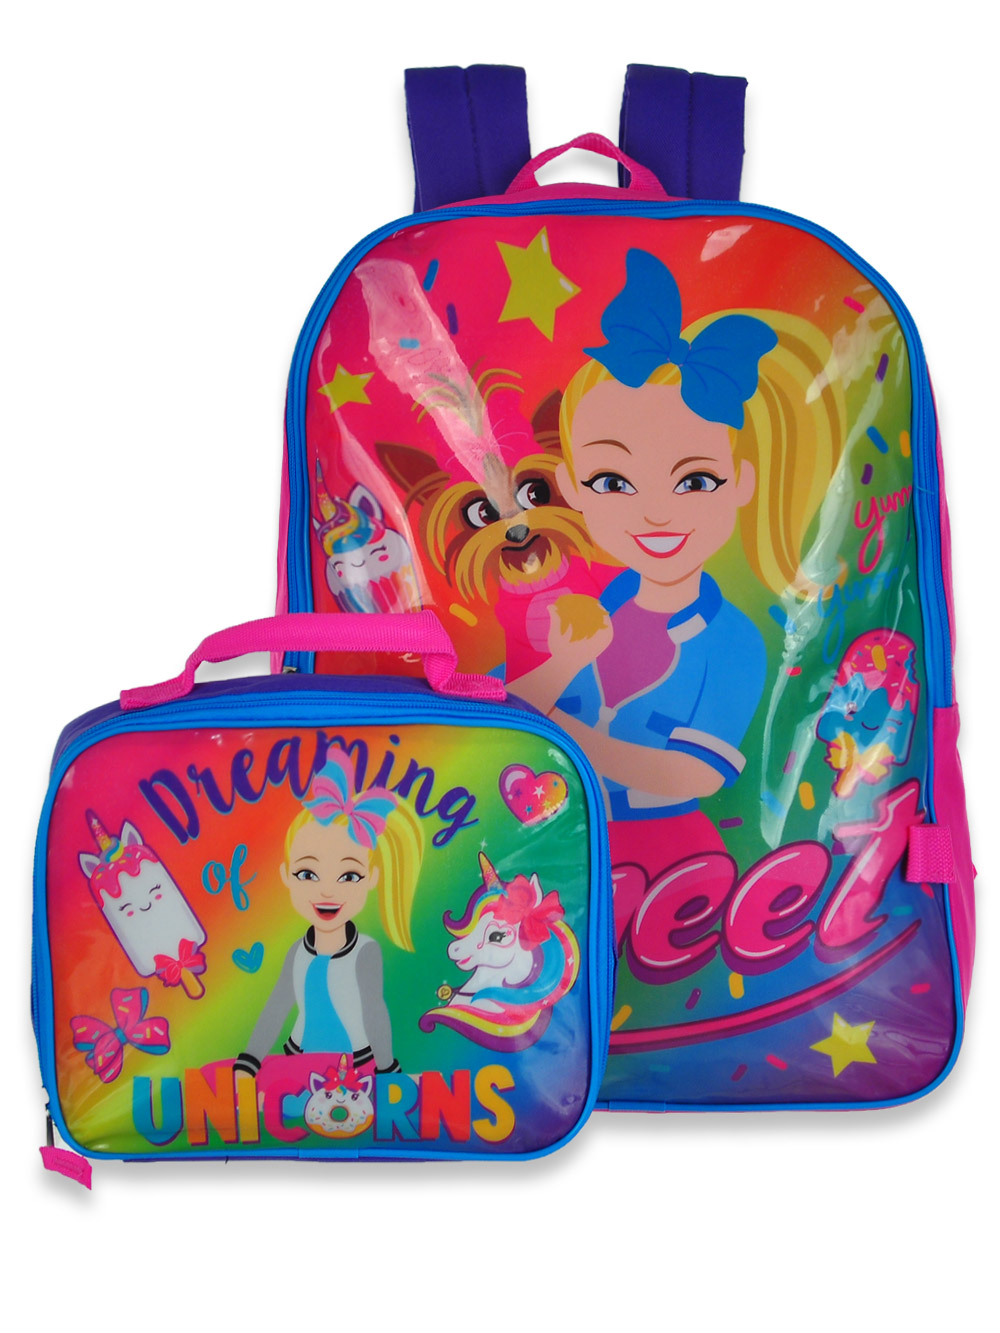 Puma Girls' 2-Piece Pounce Backpack With Lunchbox Set